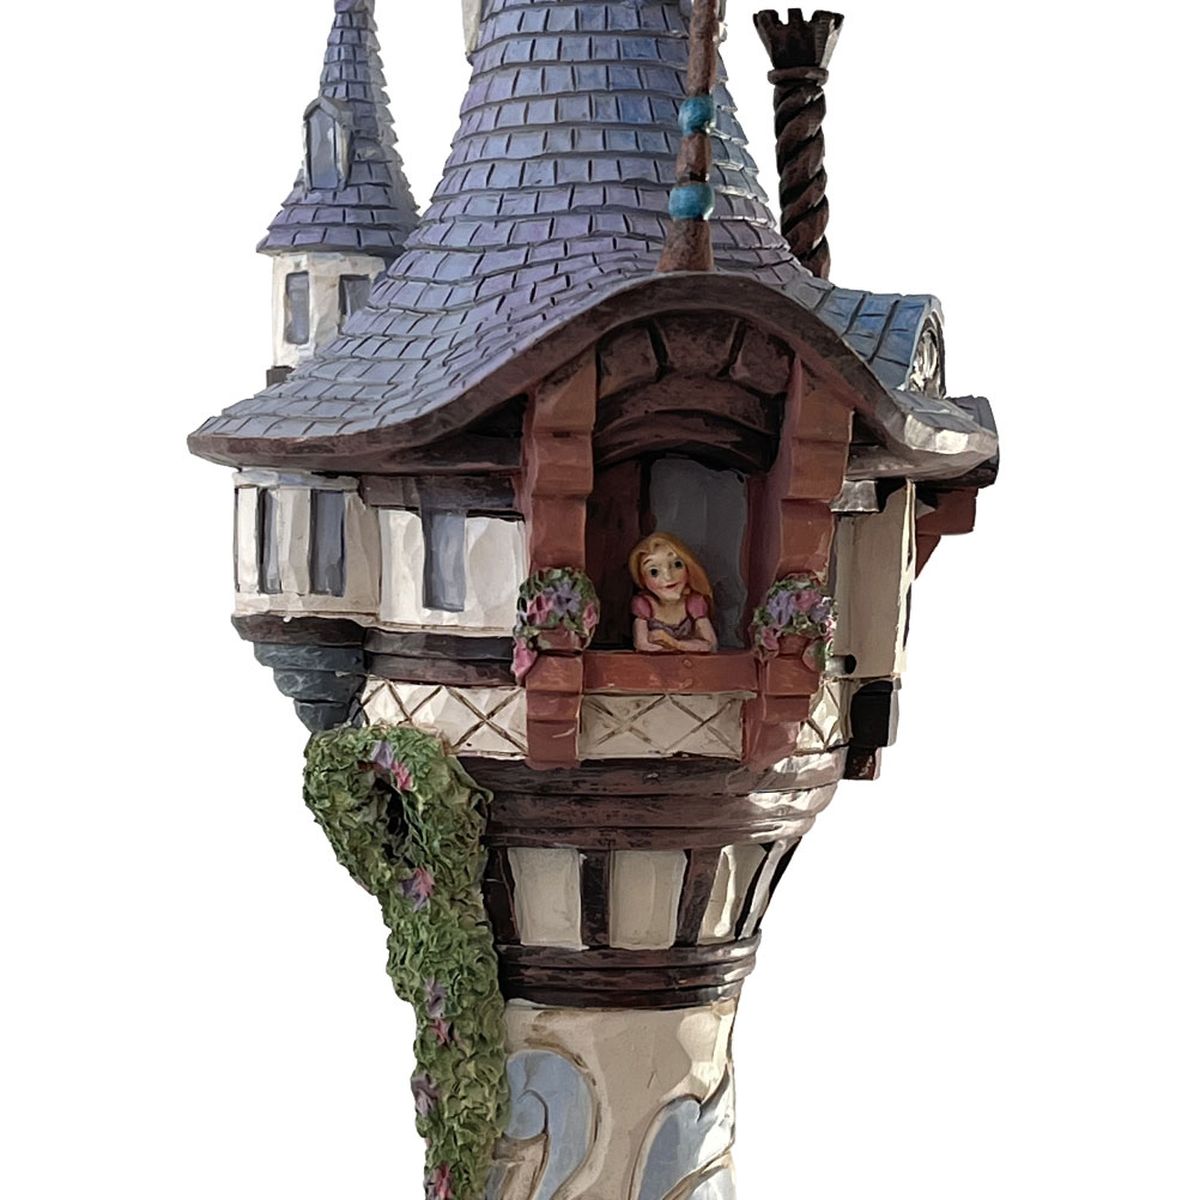 Dreaming of Floating Lights - Rapunzel Tower Masterpiece